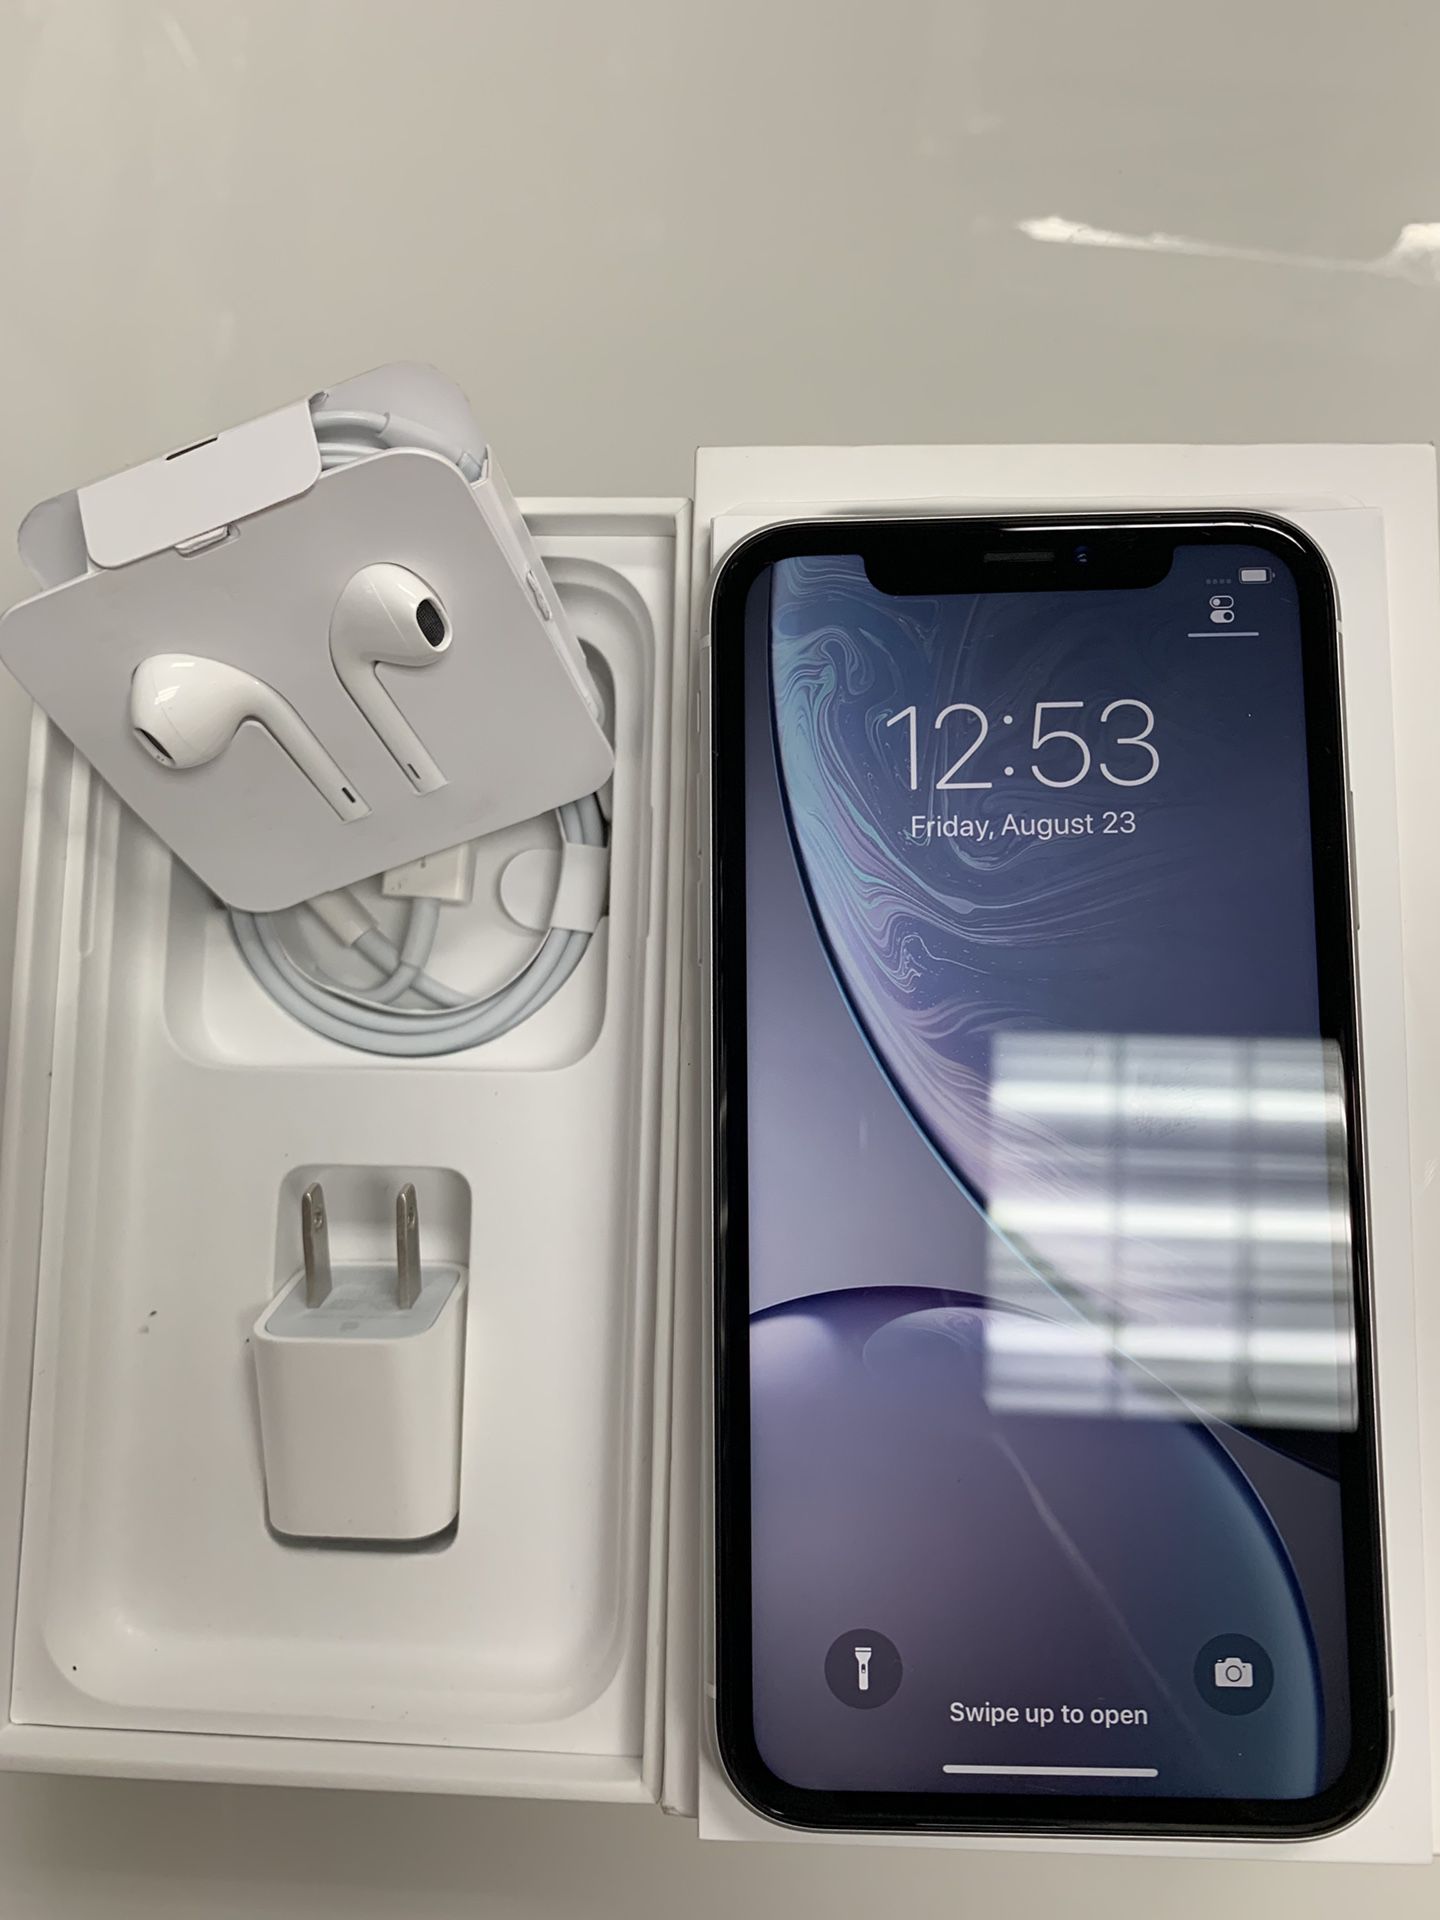 iPhone X R 64 gbs factory unlocked clean no contract ! Accessories and box price firm